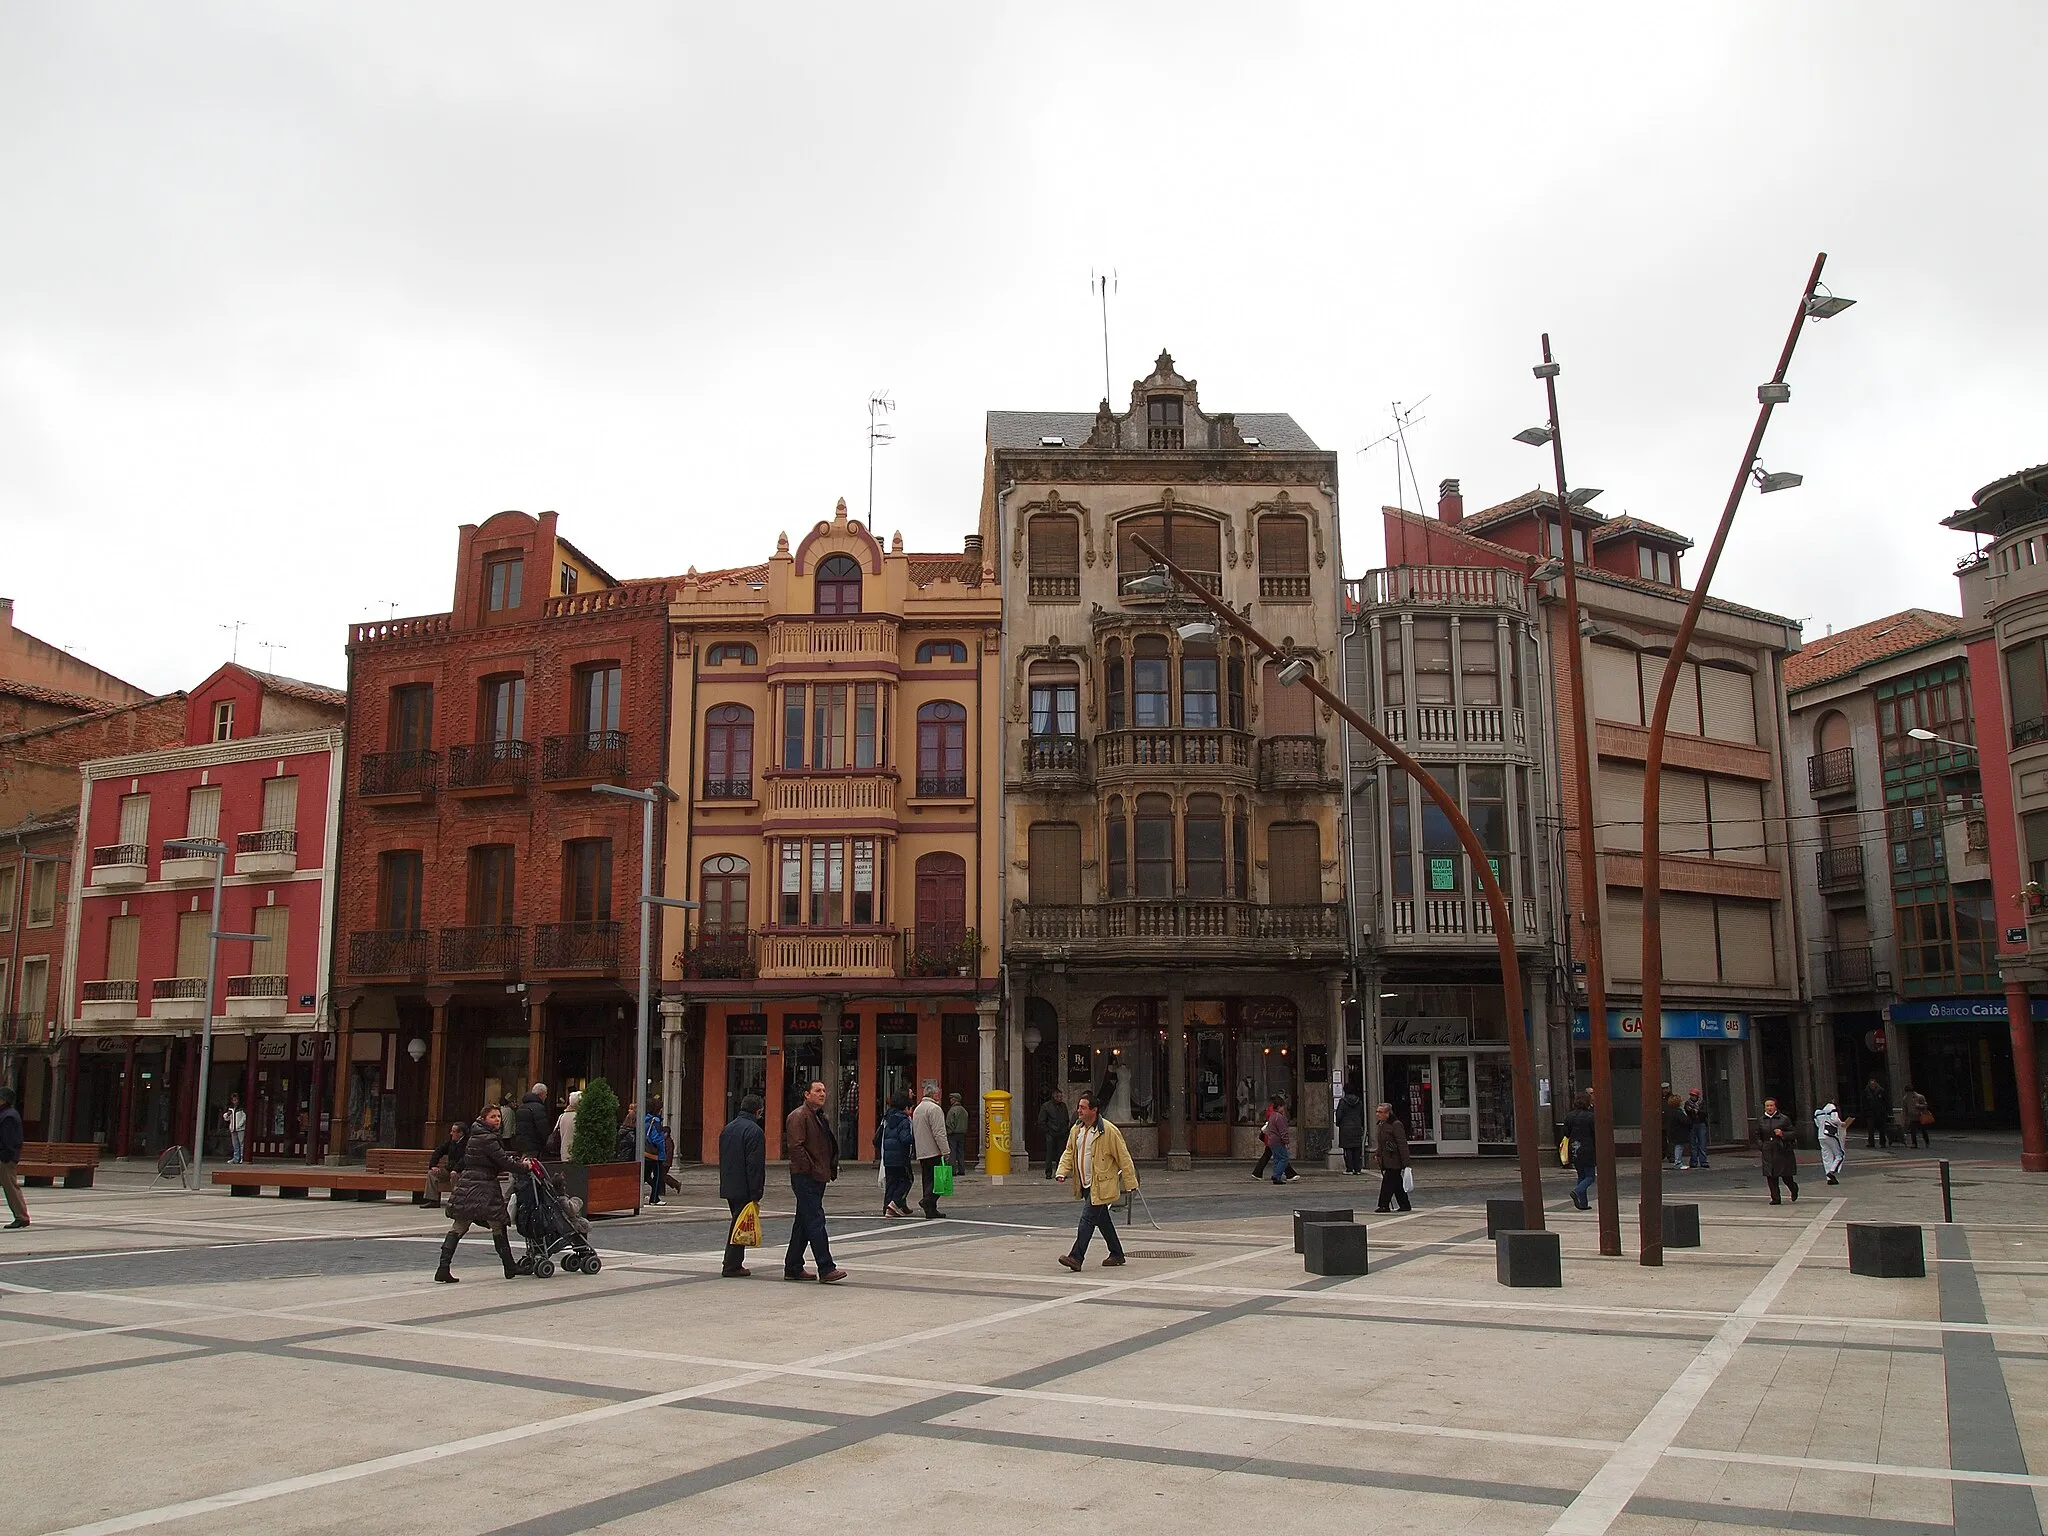 Photo showing: The main square in La Bañeza, a spanish town in the province of León, after being remodelated in 2010